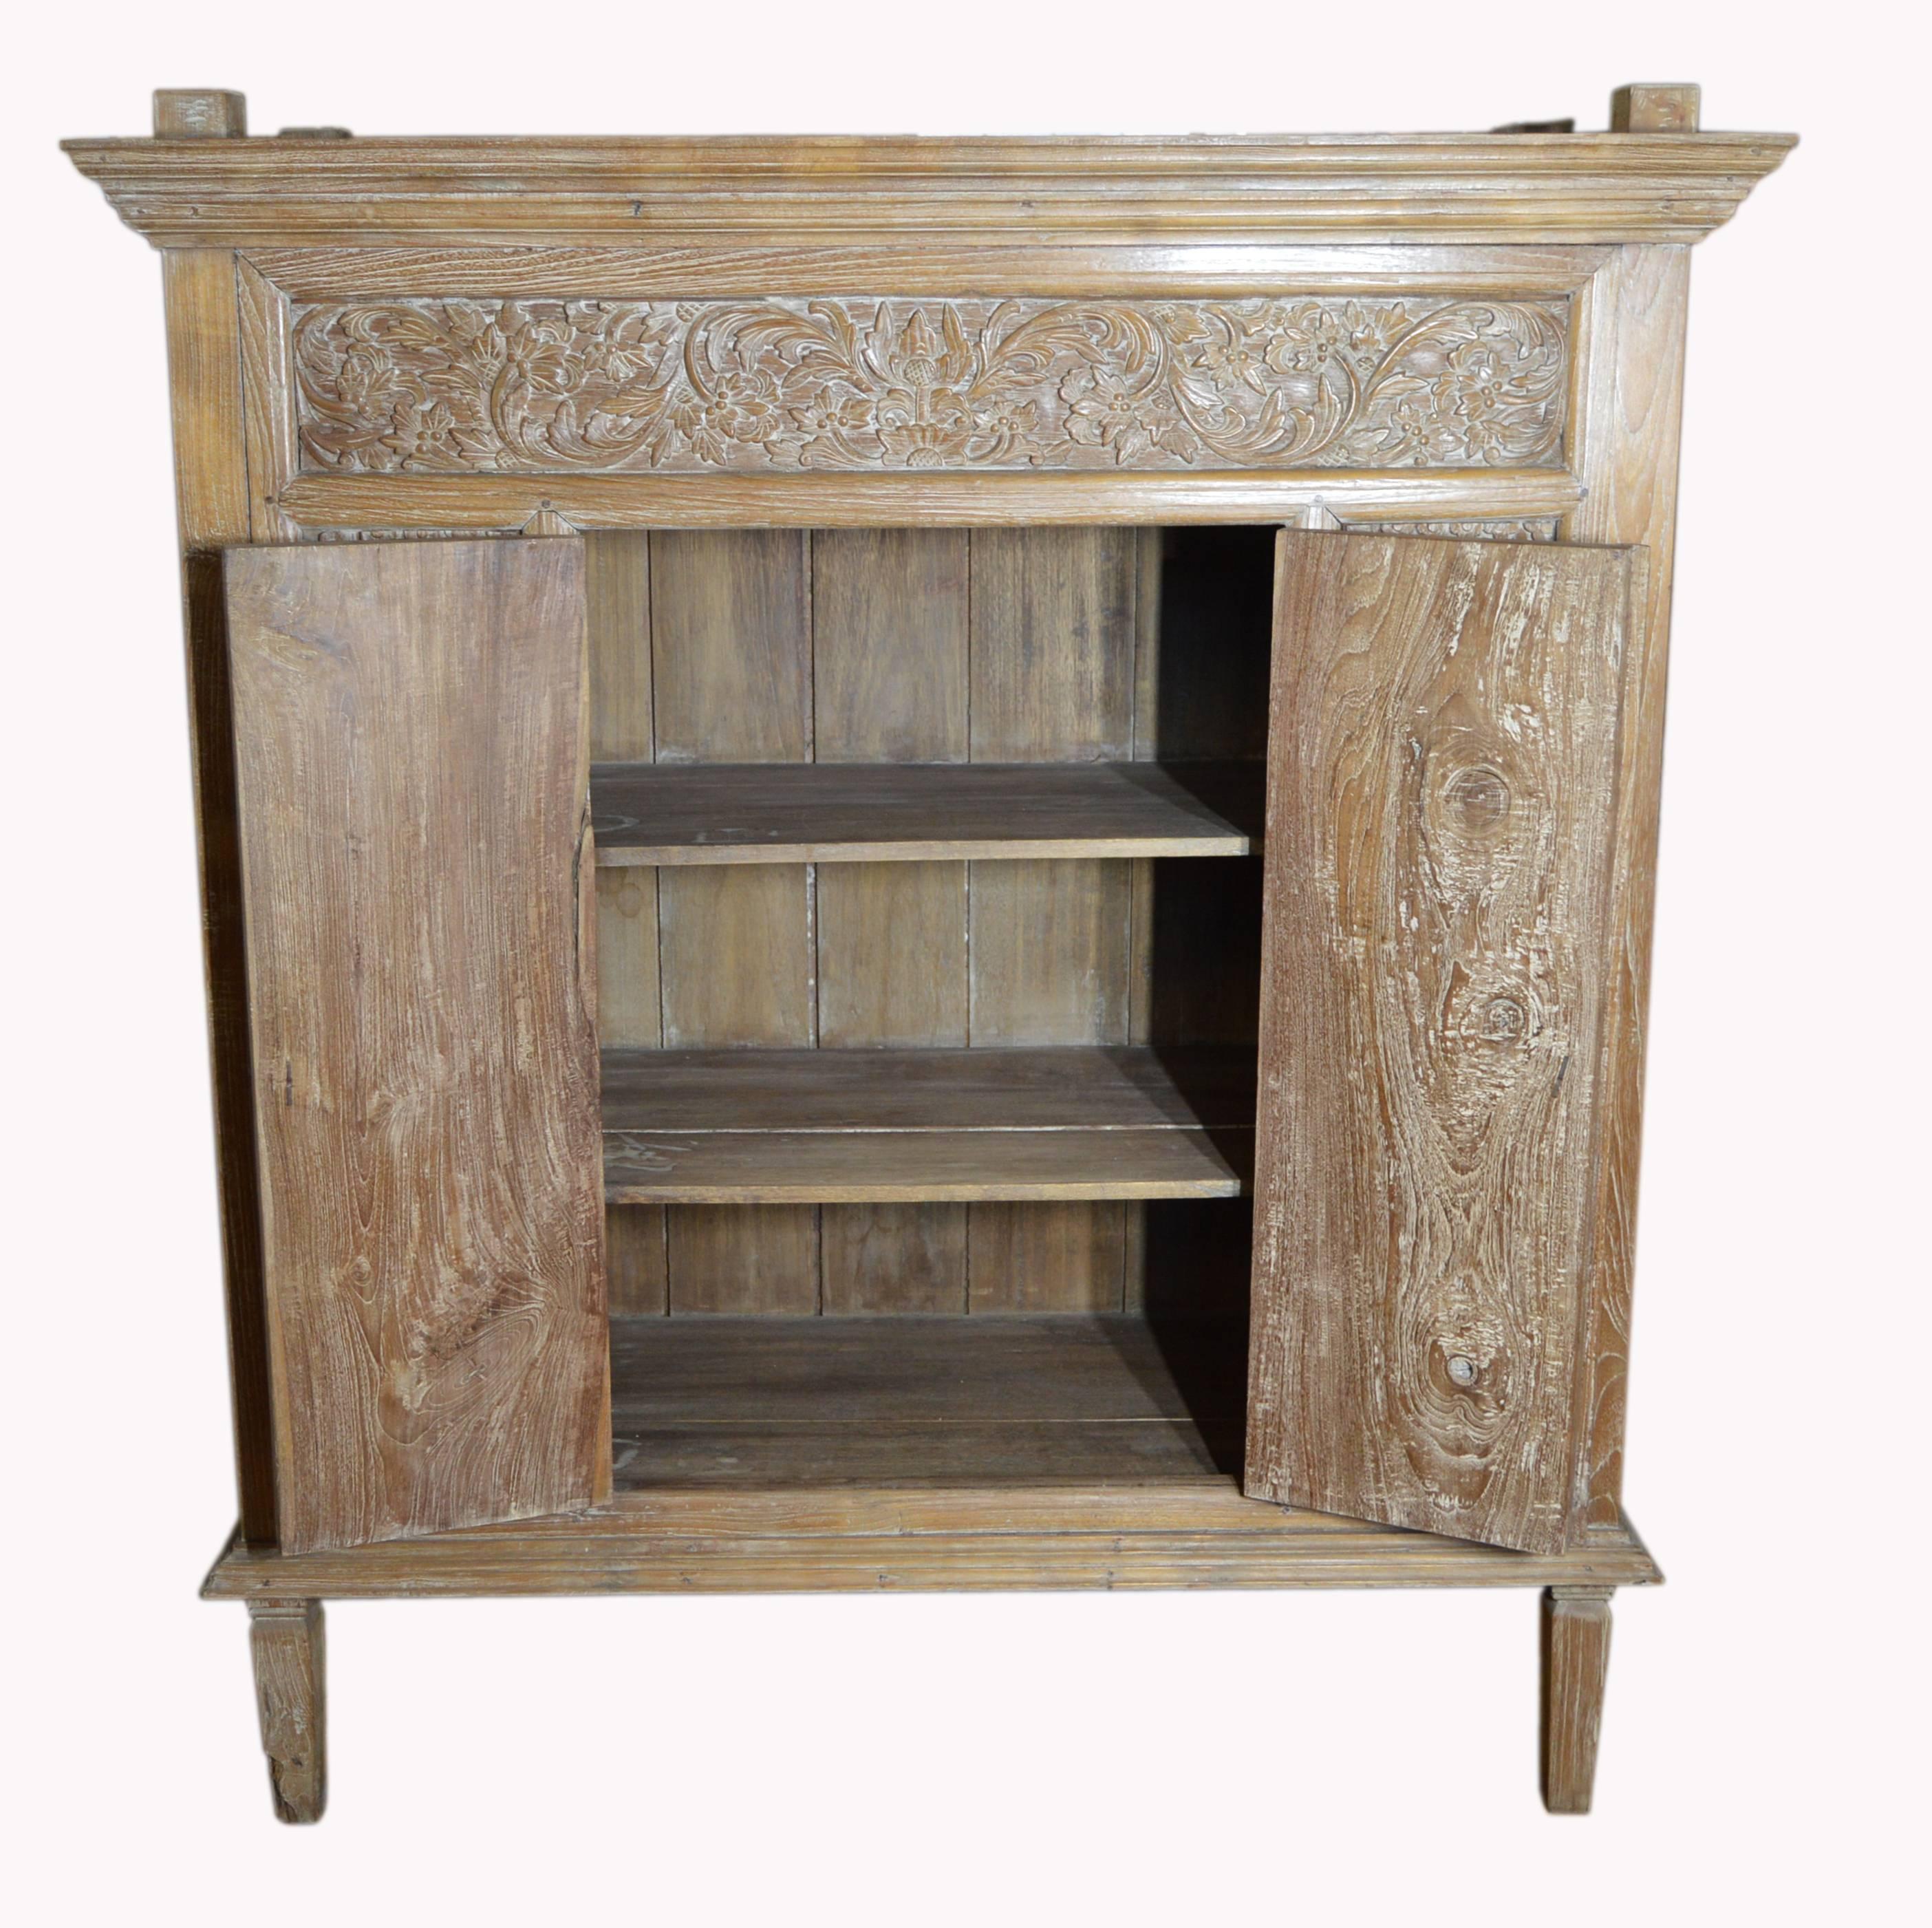 19th Century Antique Hand-Carved White Washed Teak Cabinet with Scrollwork and Paneled Doors